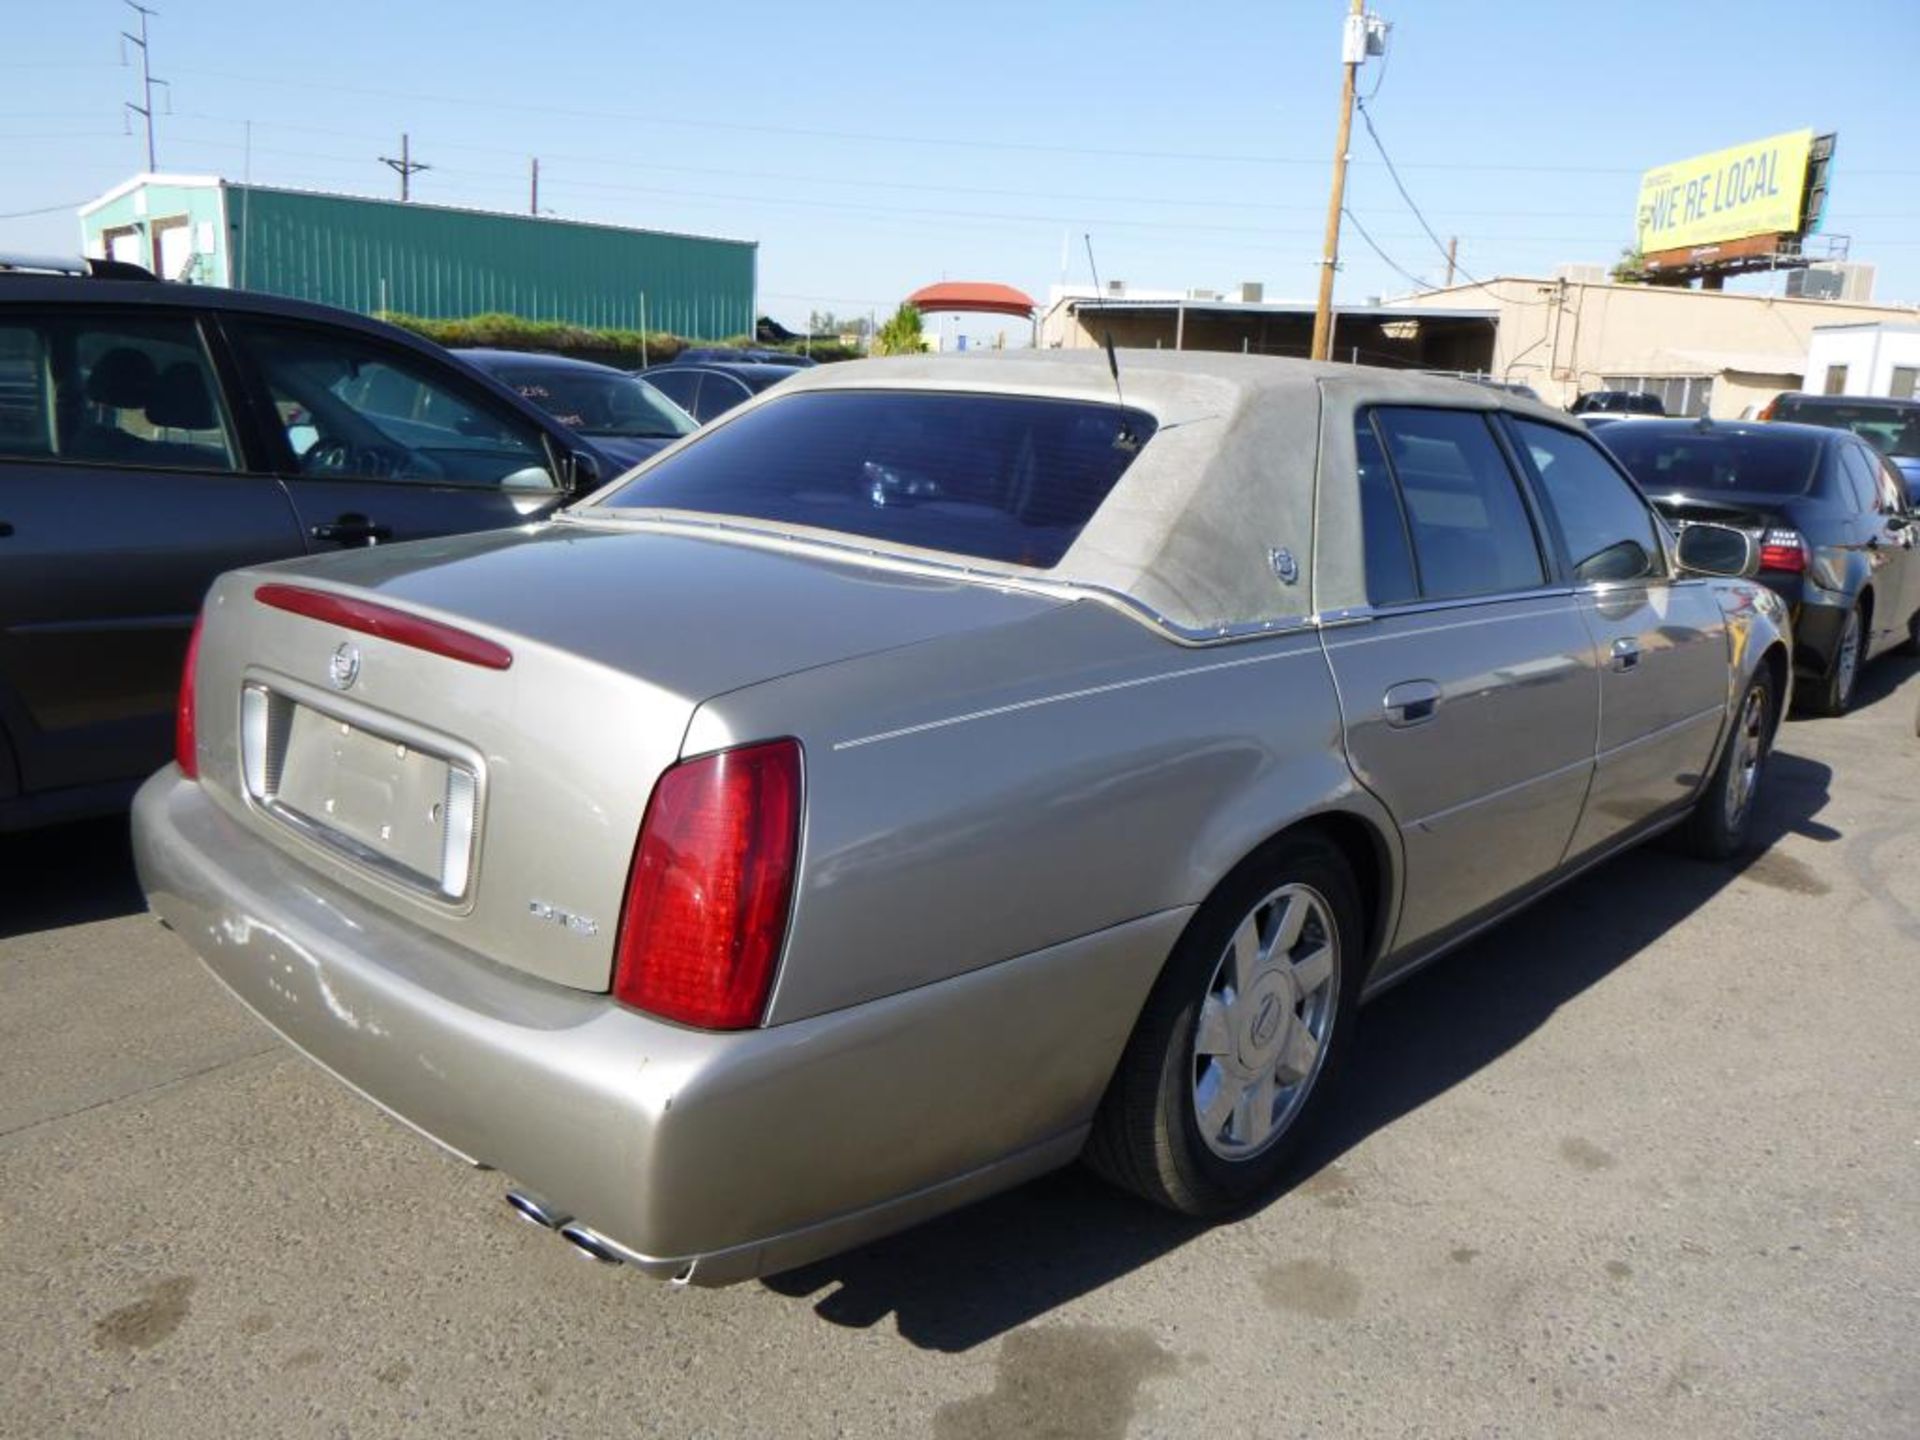 (Lot # 3331) 2002 Cadillac Deville - Image 4 of 14